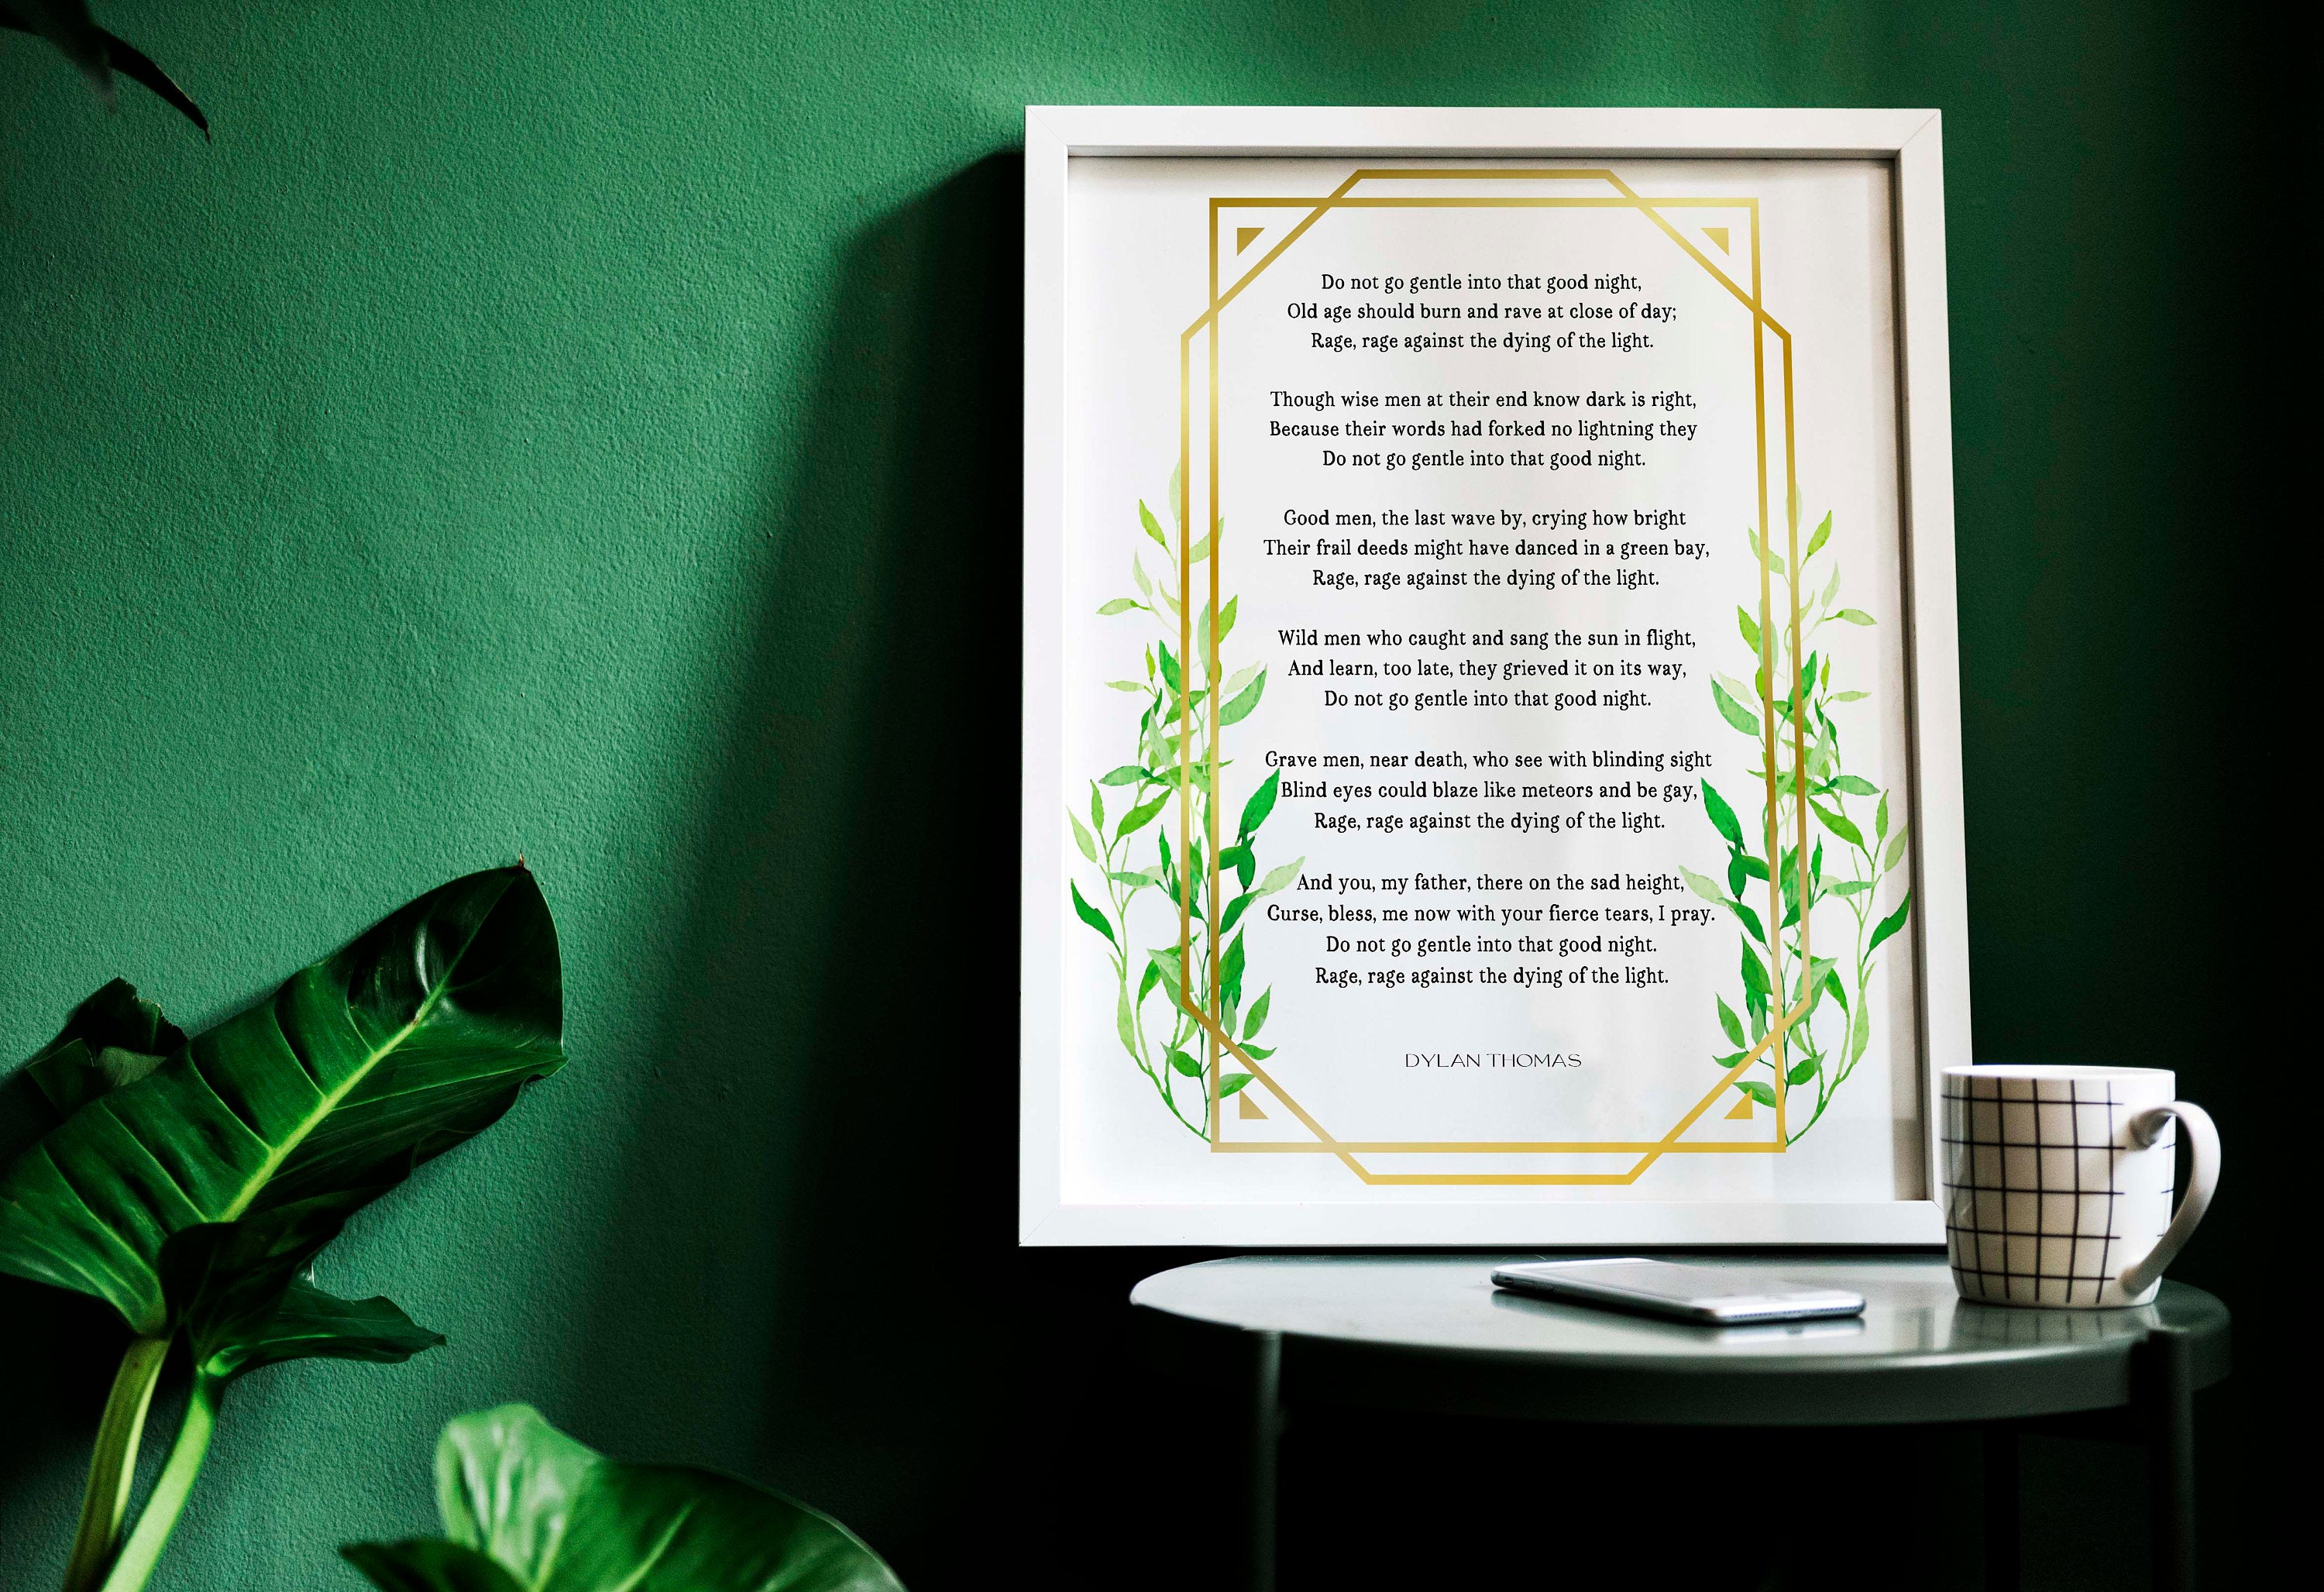 Dylan Thomas Poem Do Not Go Gentle Into That Good Night Wall Art Prints